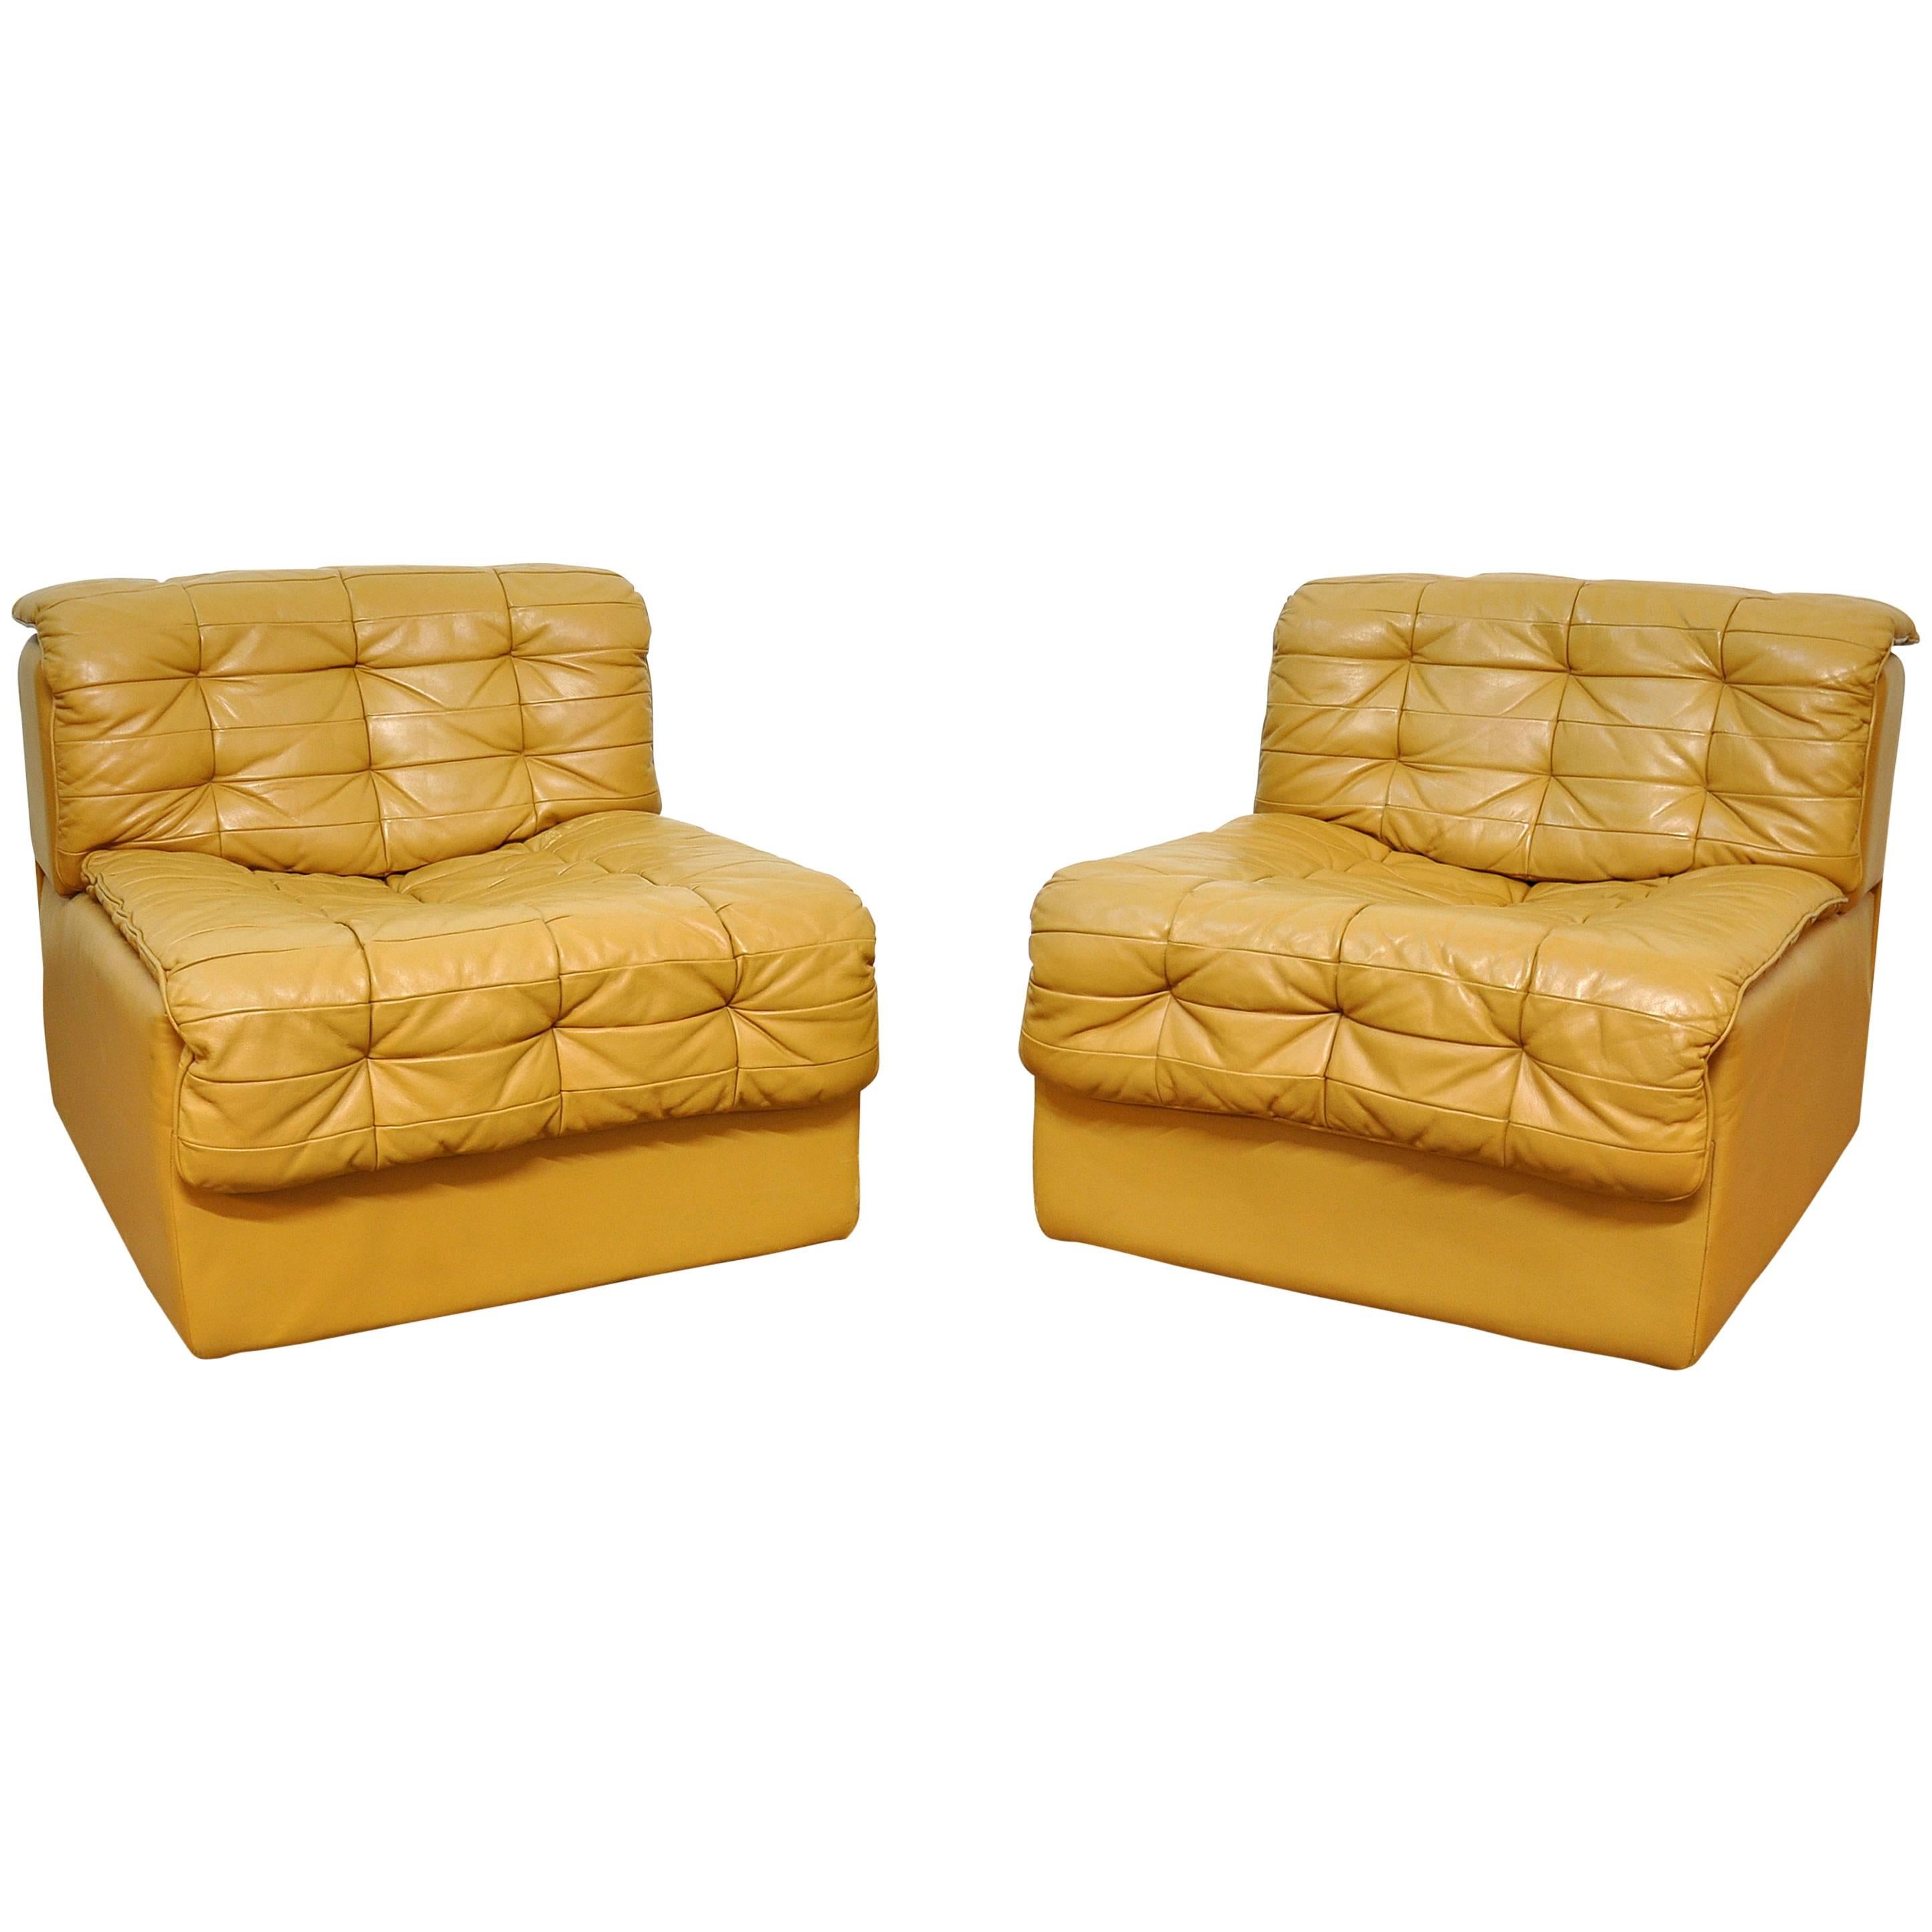 Pair of De Sede DS-11 Caramel Leather Lounge Chairs